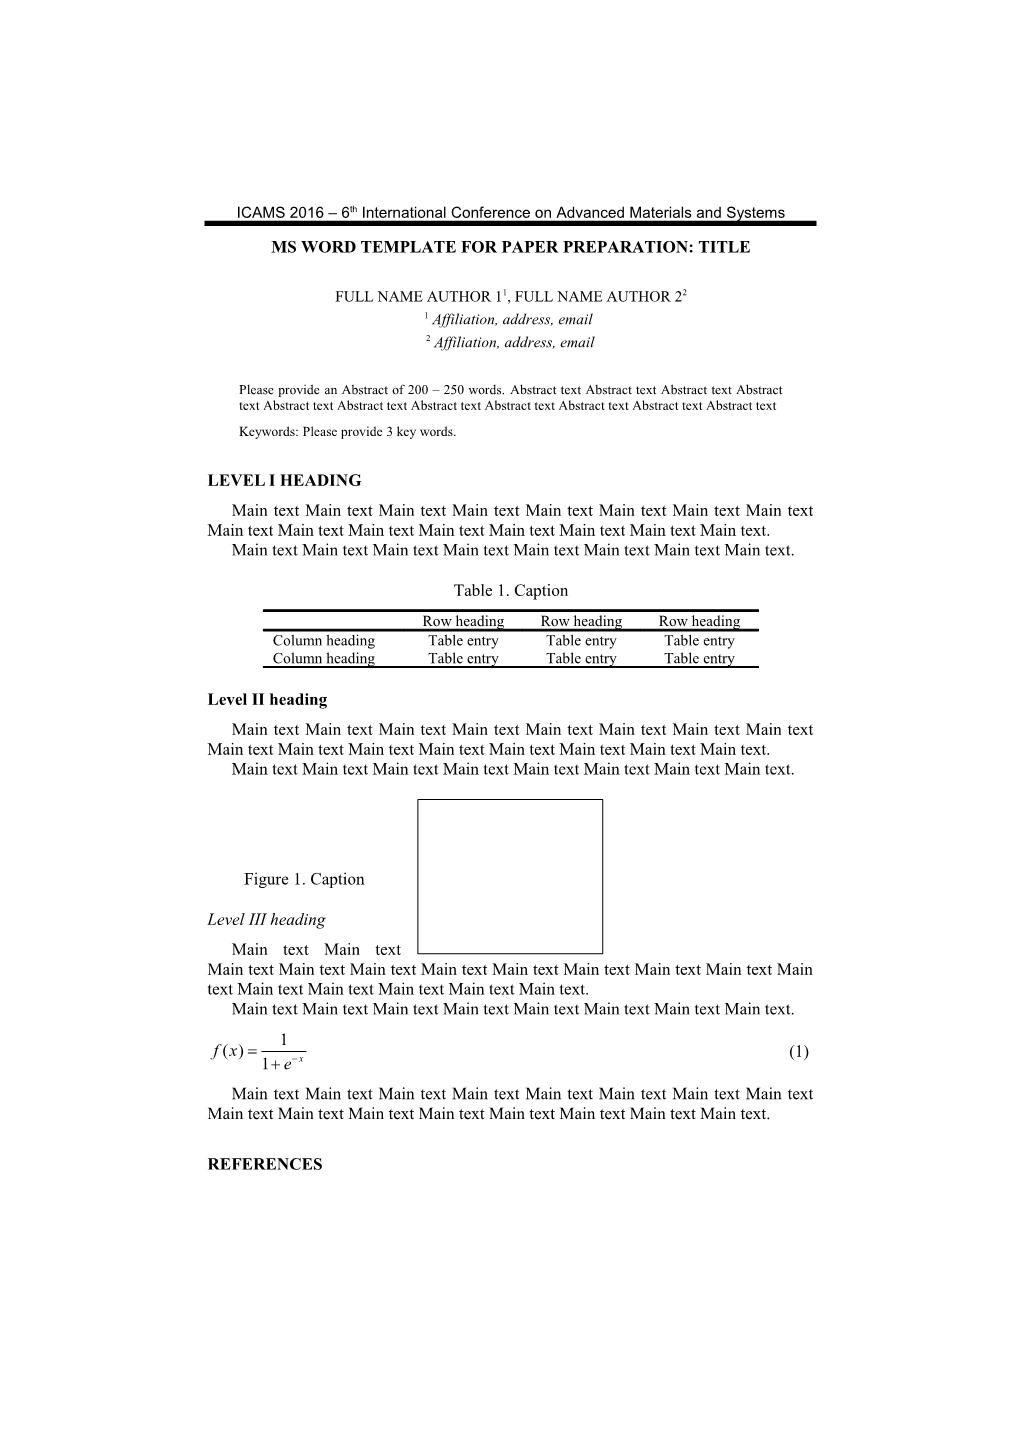 MS Word Template for Paper Preparation: TITLE